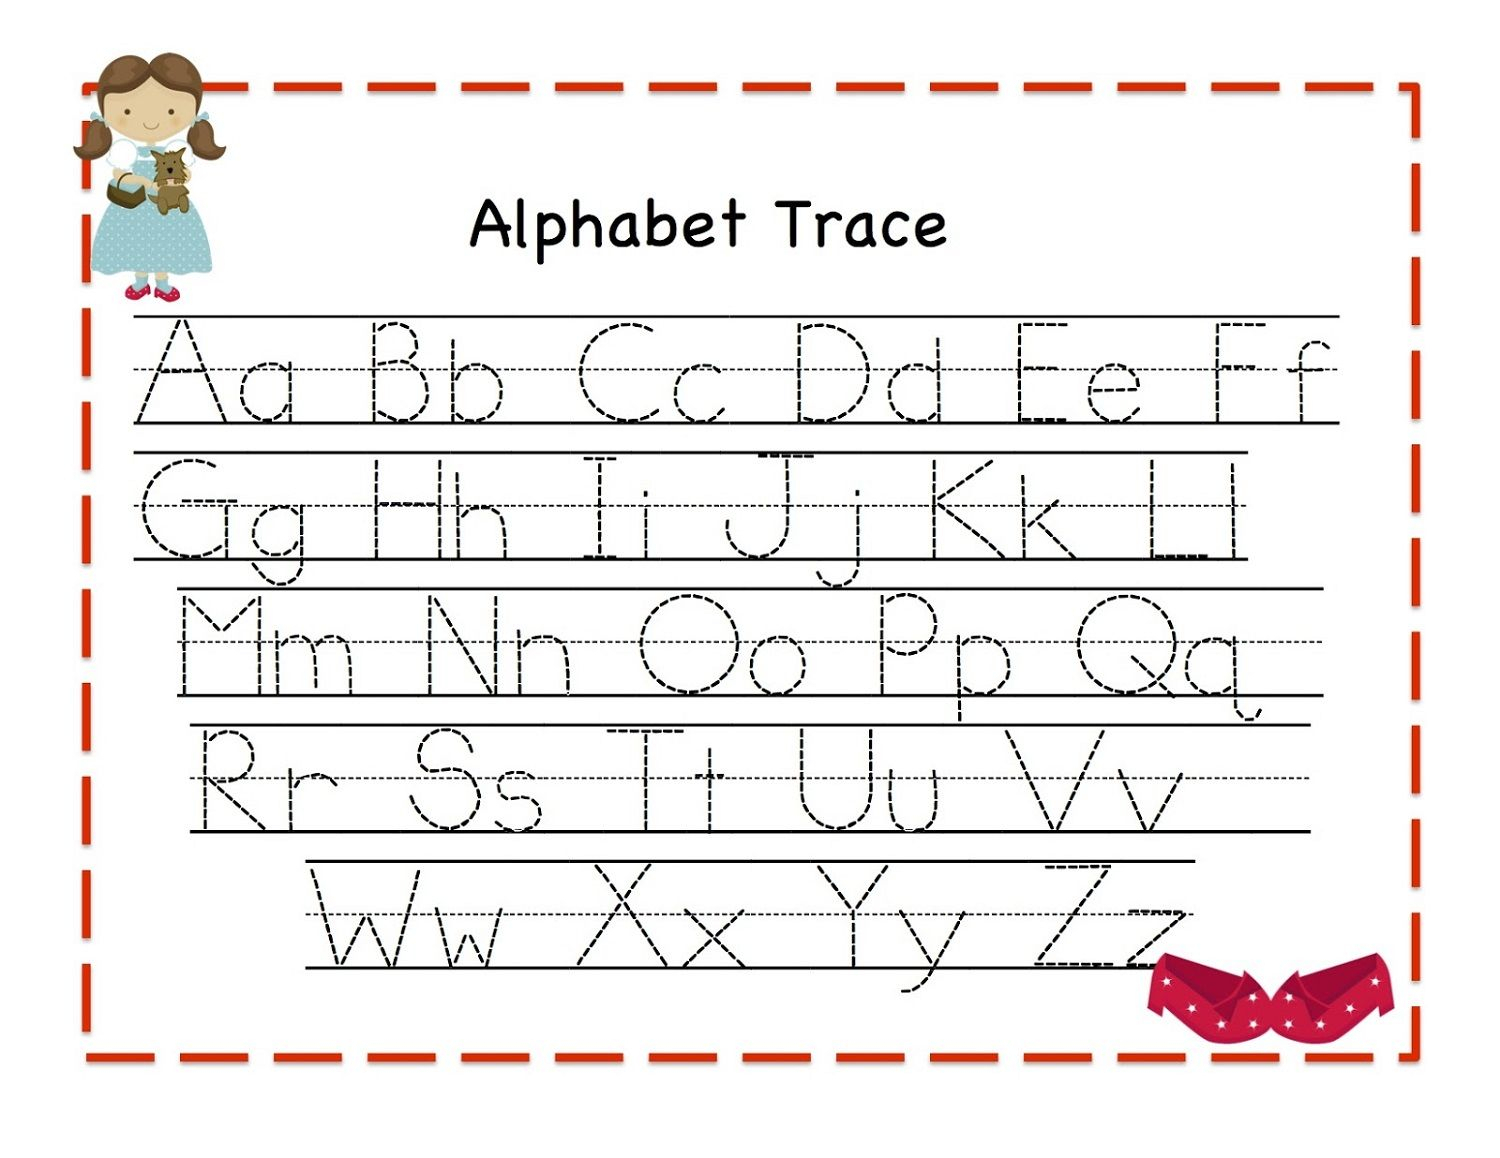 Traceable Alphabet For Learning Exercise | Dear Joya with Alphabet Tracing Exercises